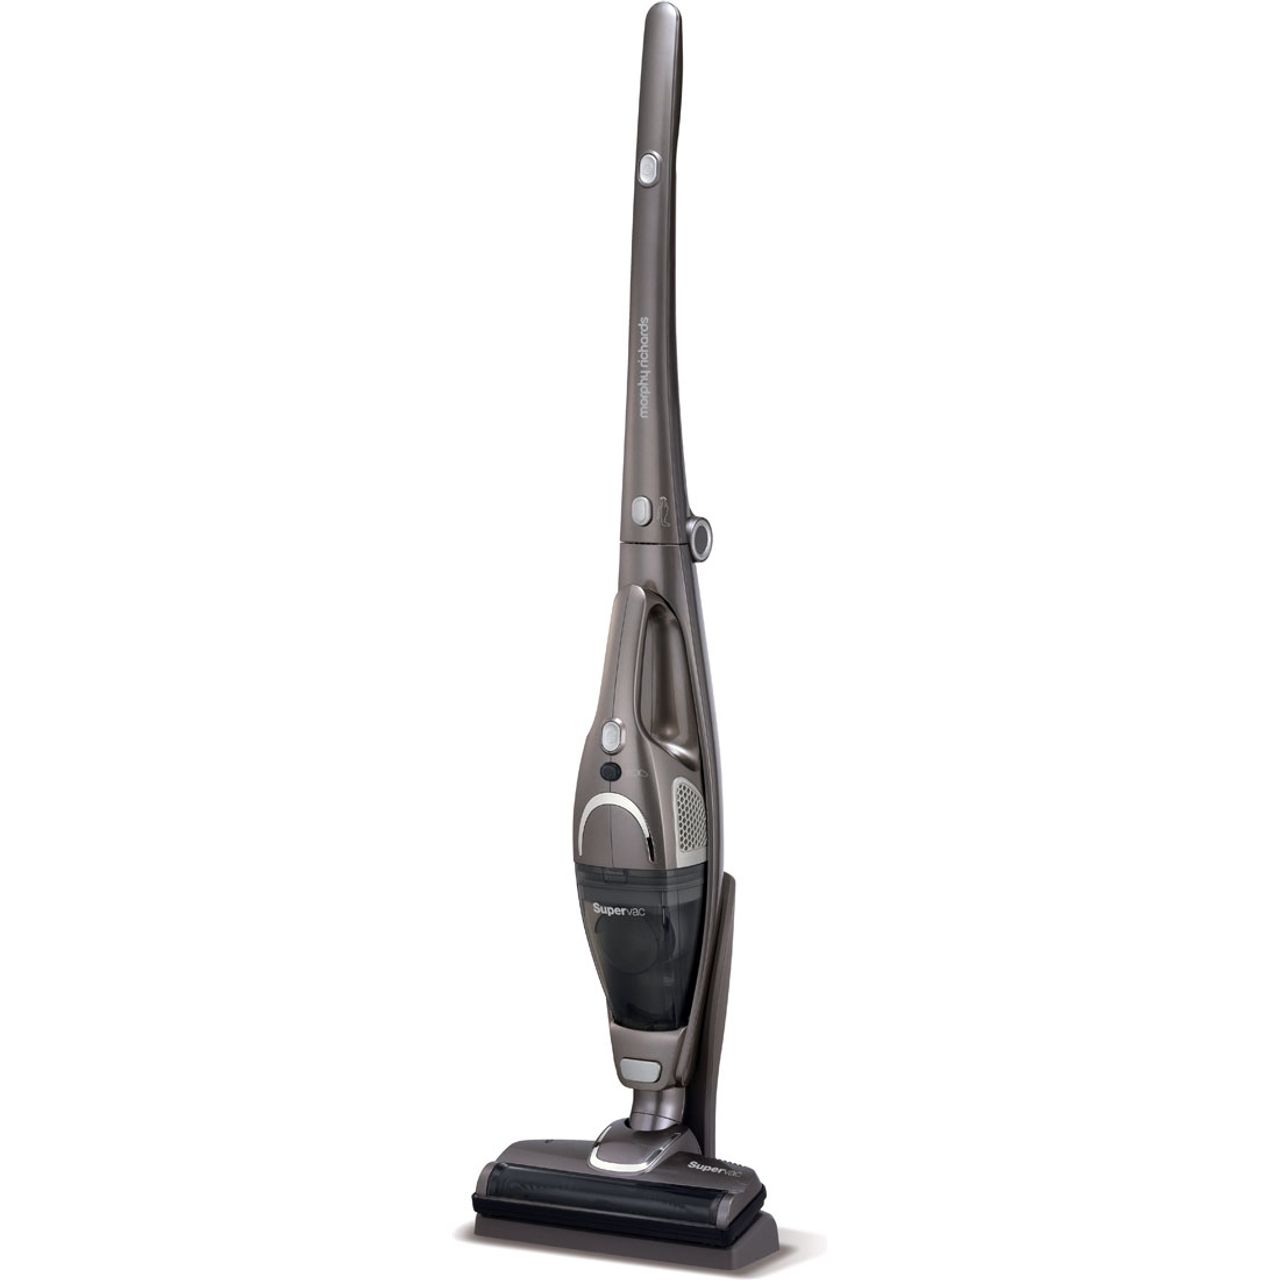 Morphy Richards Supervac 2-in-1 732002 Cordless Vacuum Cleaner with up to 20 Minutes Run Time Review